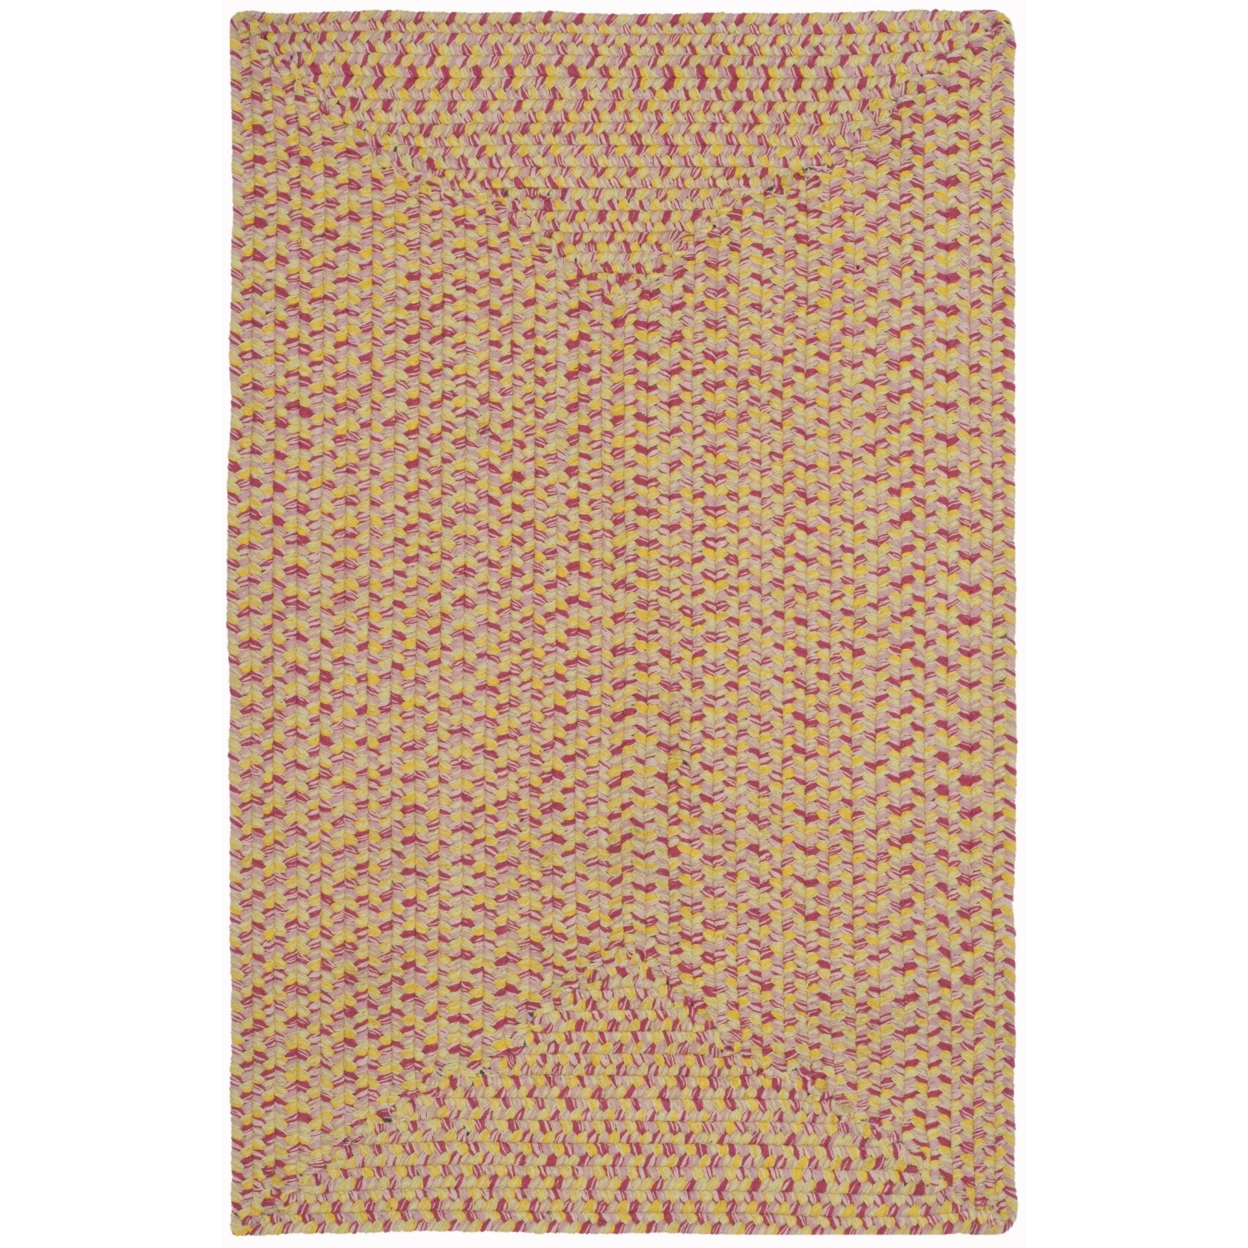 SAFAVIEH Braided Collection BRD164A Handwoven Multi Rug - 8' X 10' Oval